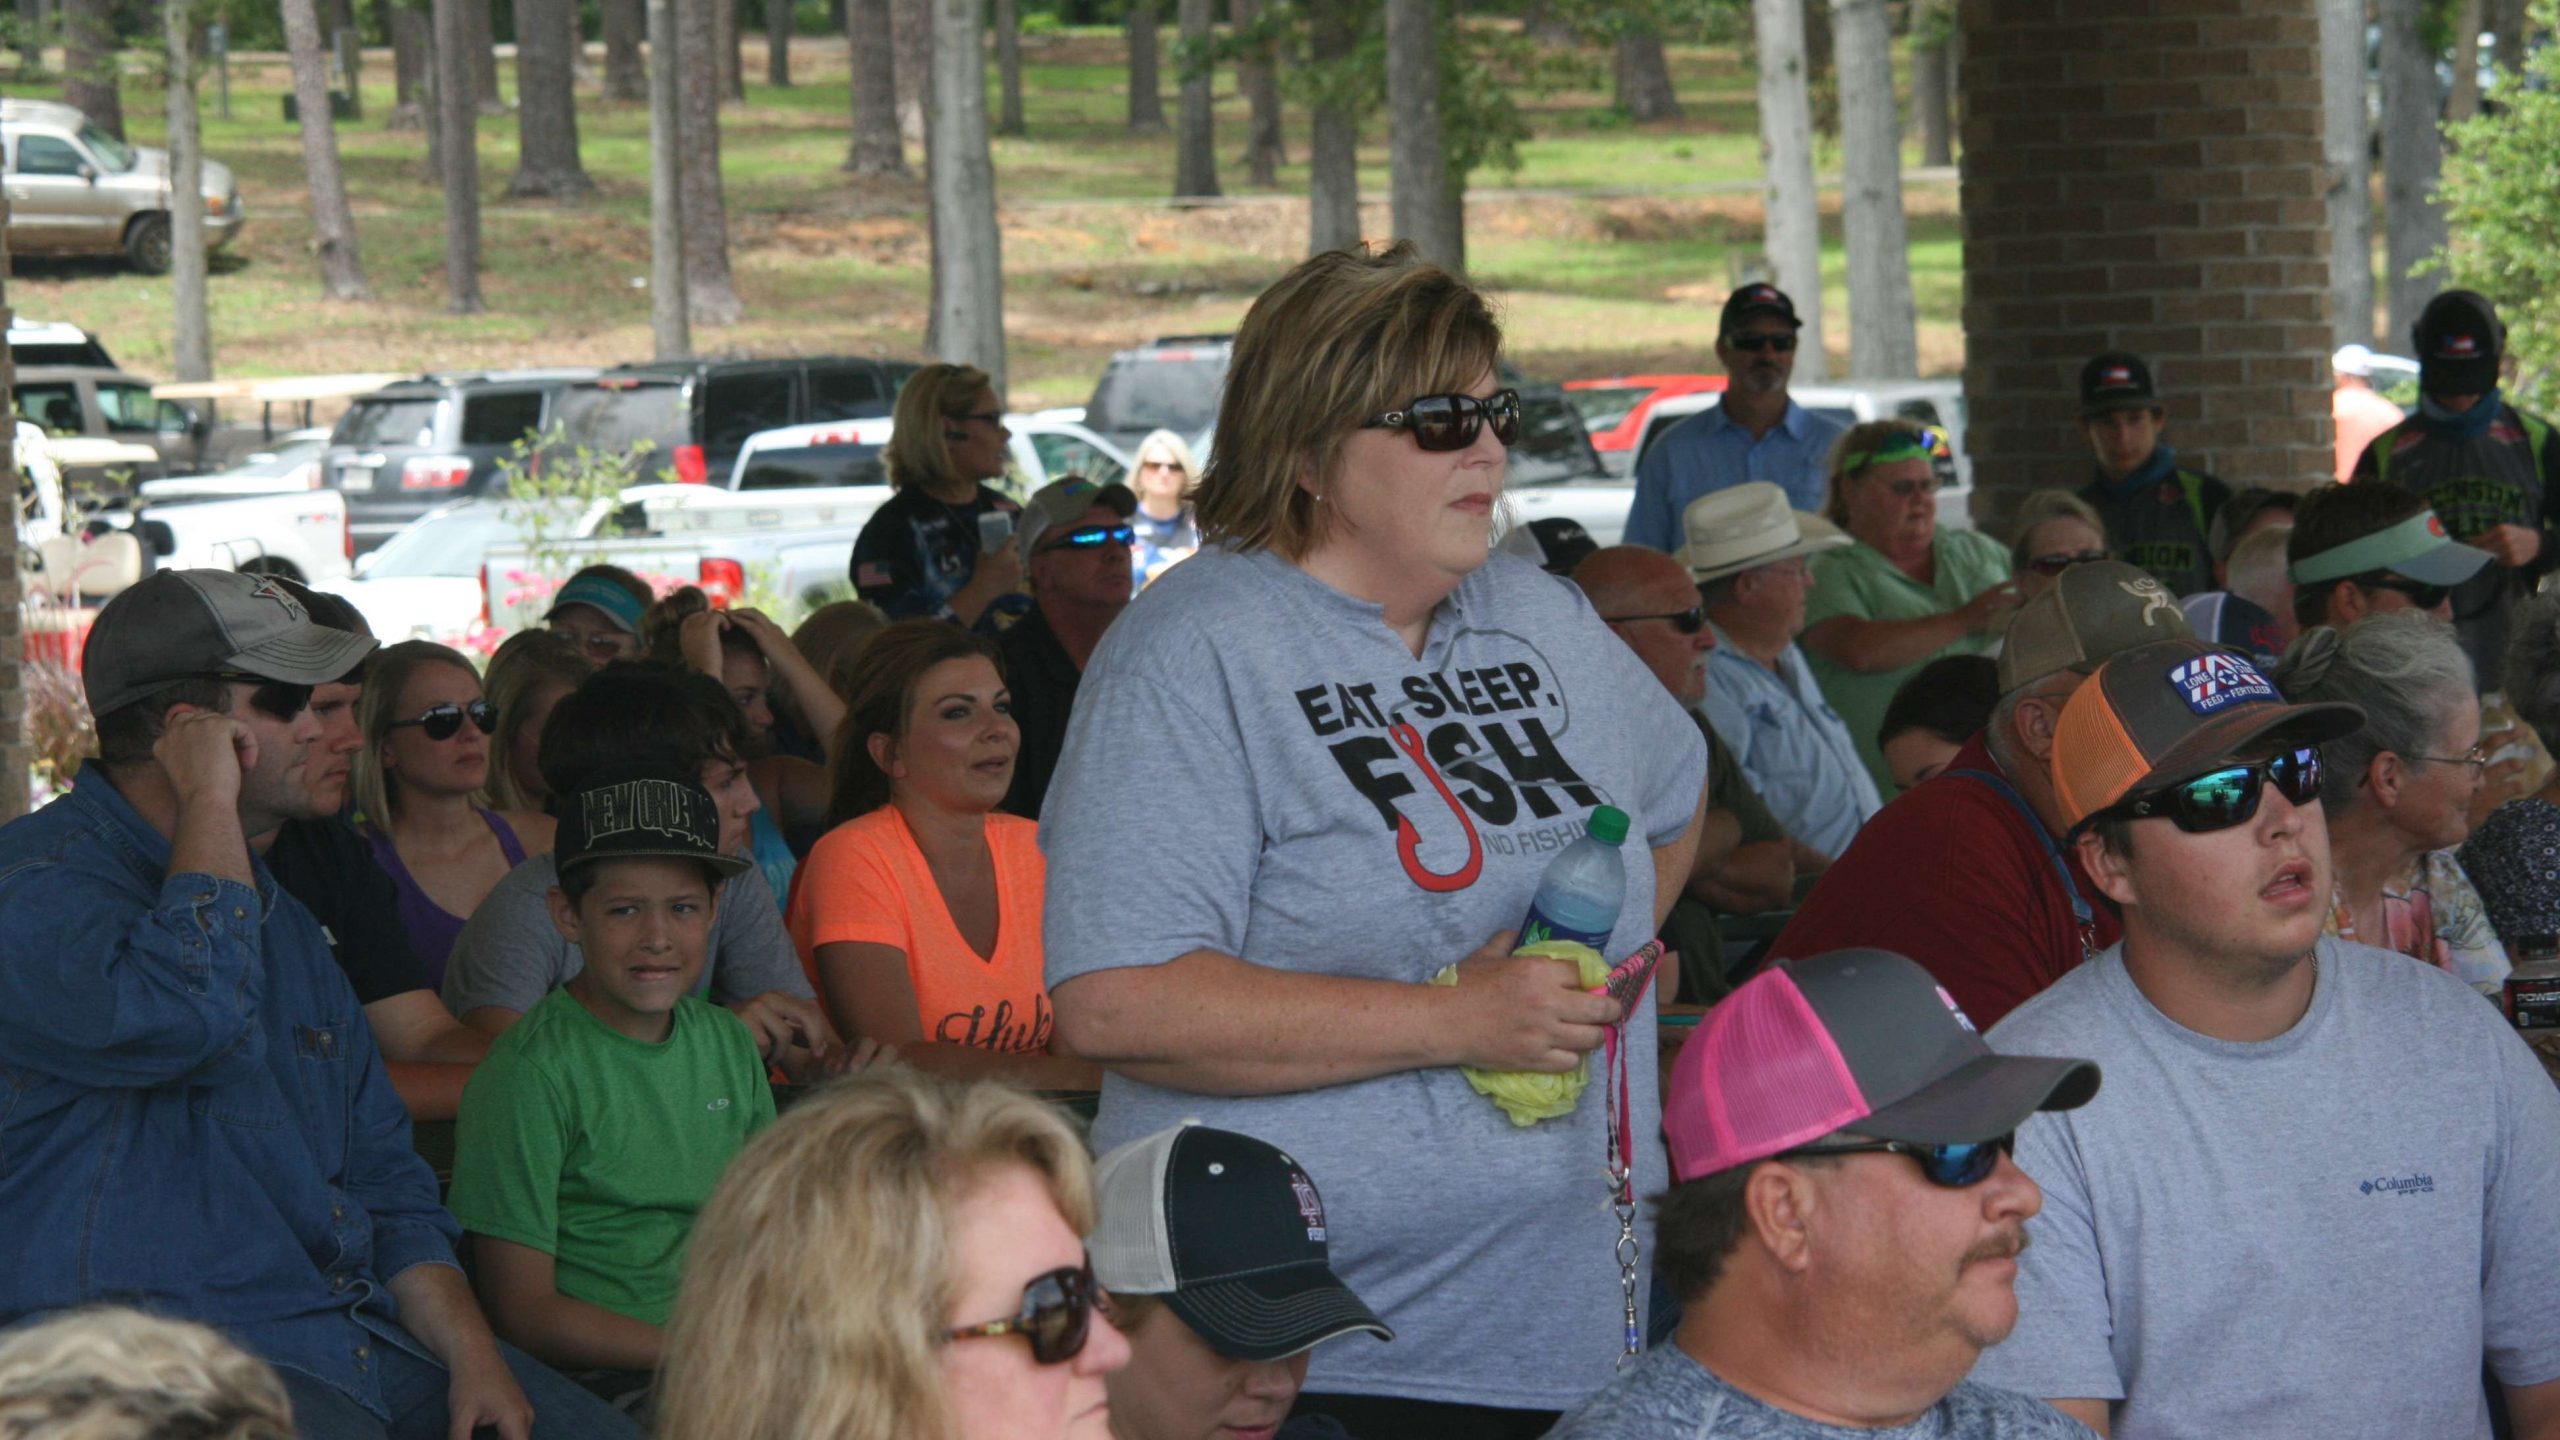 The fans kept their eyes on the stage as they eagerly awaited the anglers.